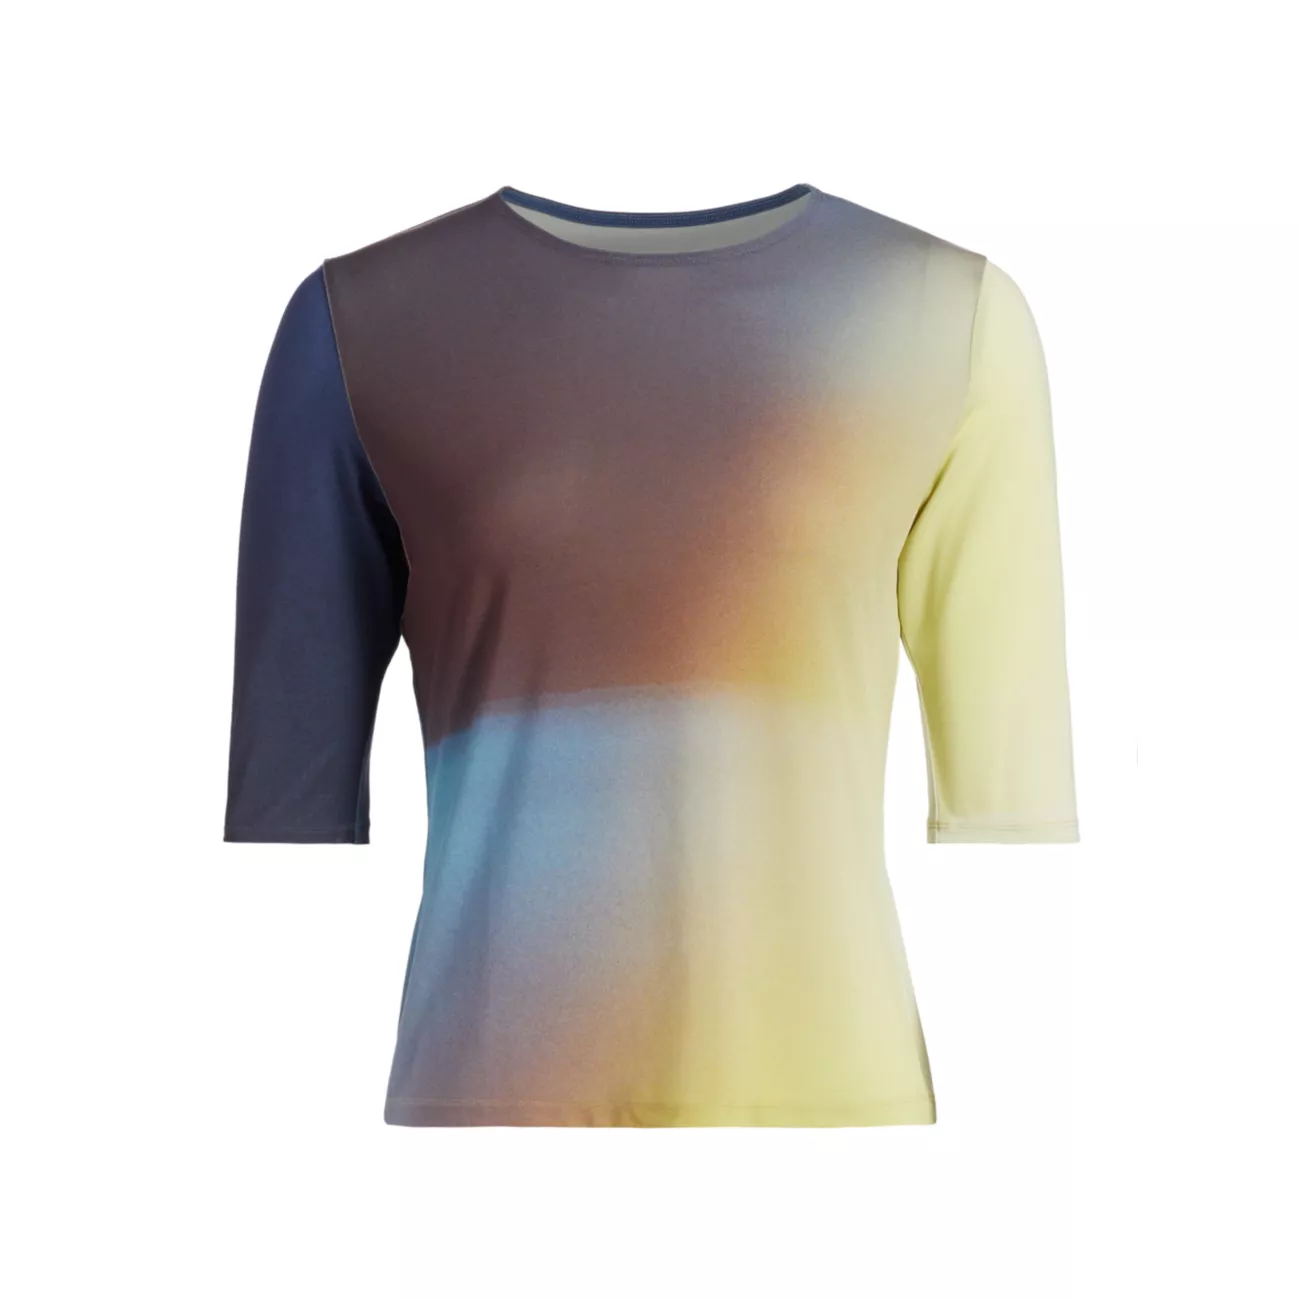 Grasping The Formless Light Leak Gradient Top Pleats Please Issey Miyake